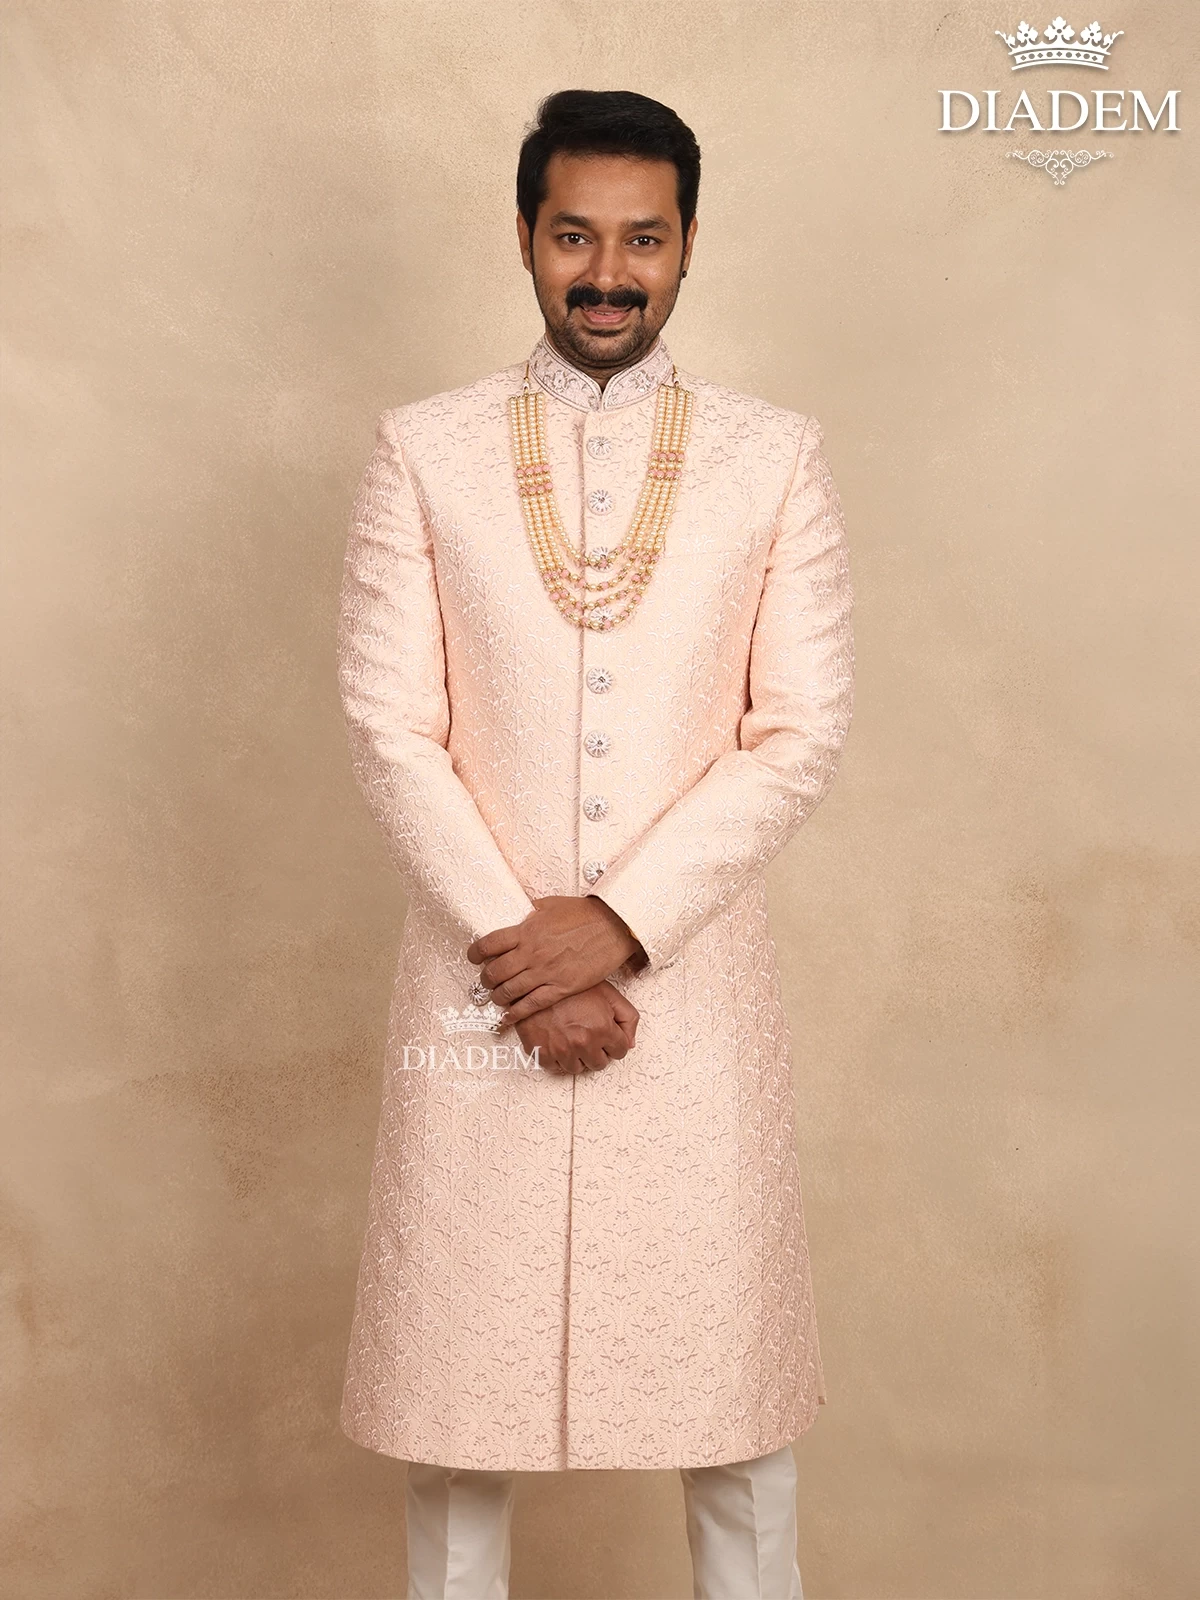 Light Peach Raw Silk Sherwani Suit Adorned With Floral Threadwork Embroidery, Paired With Bead Mala